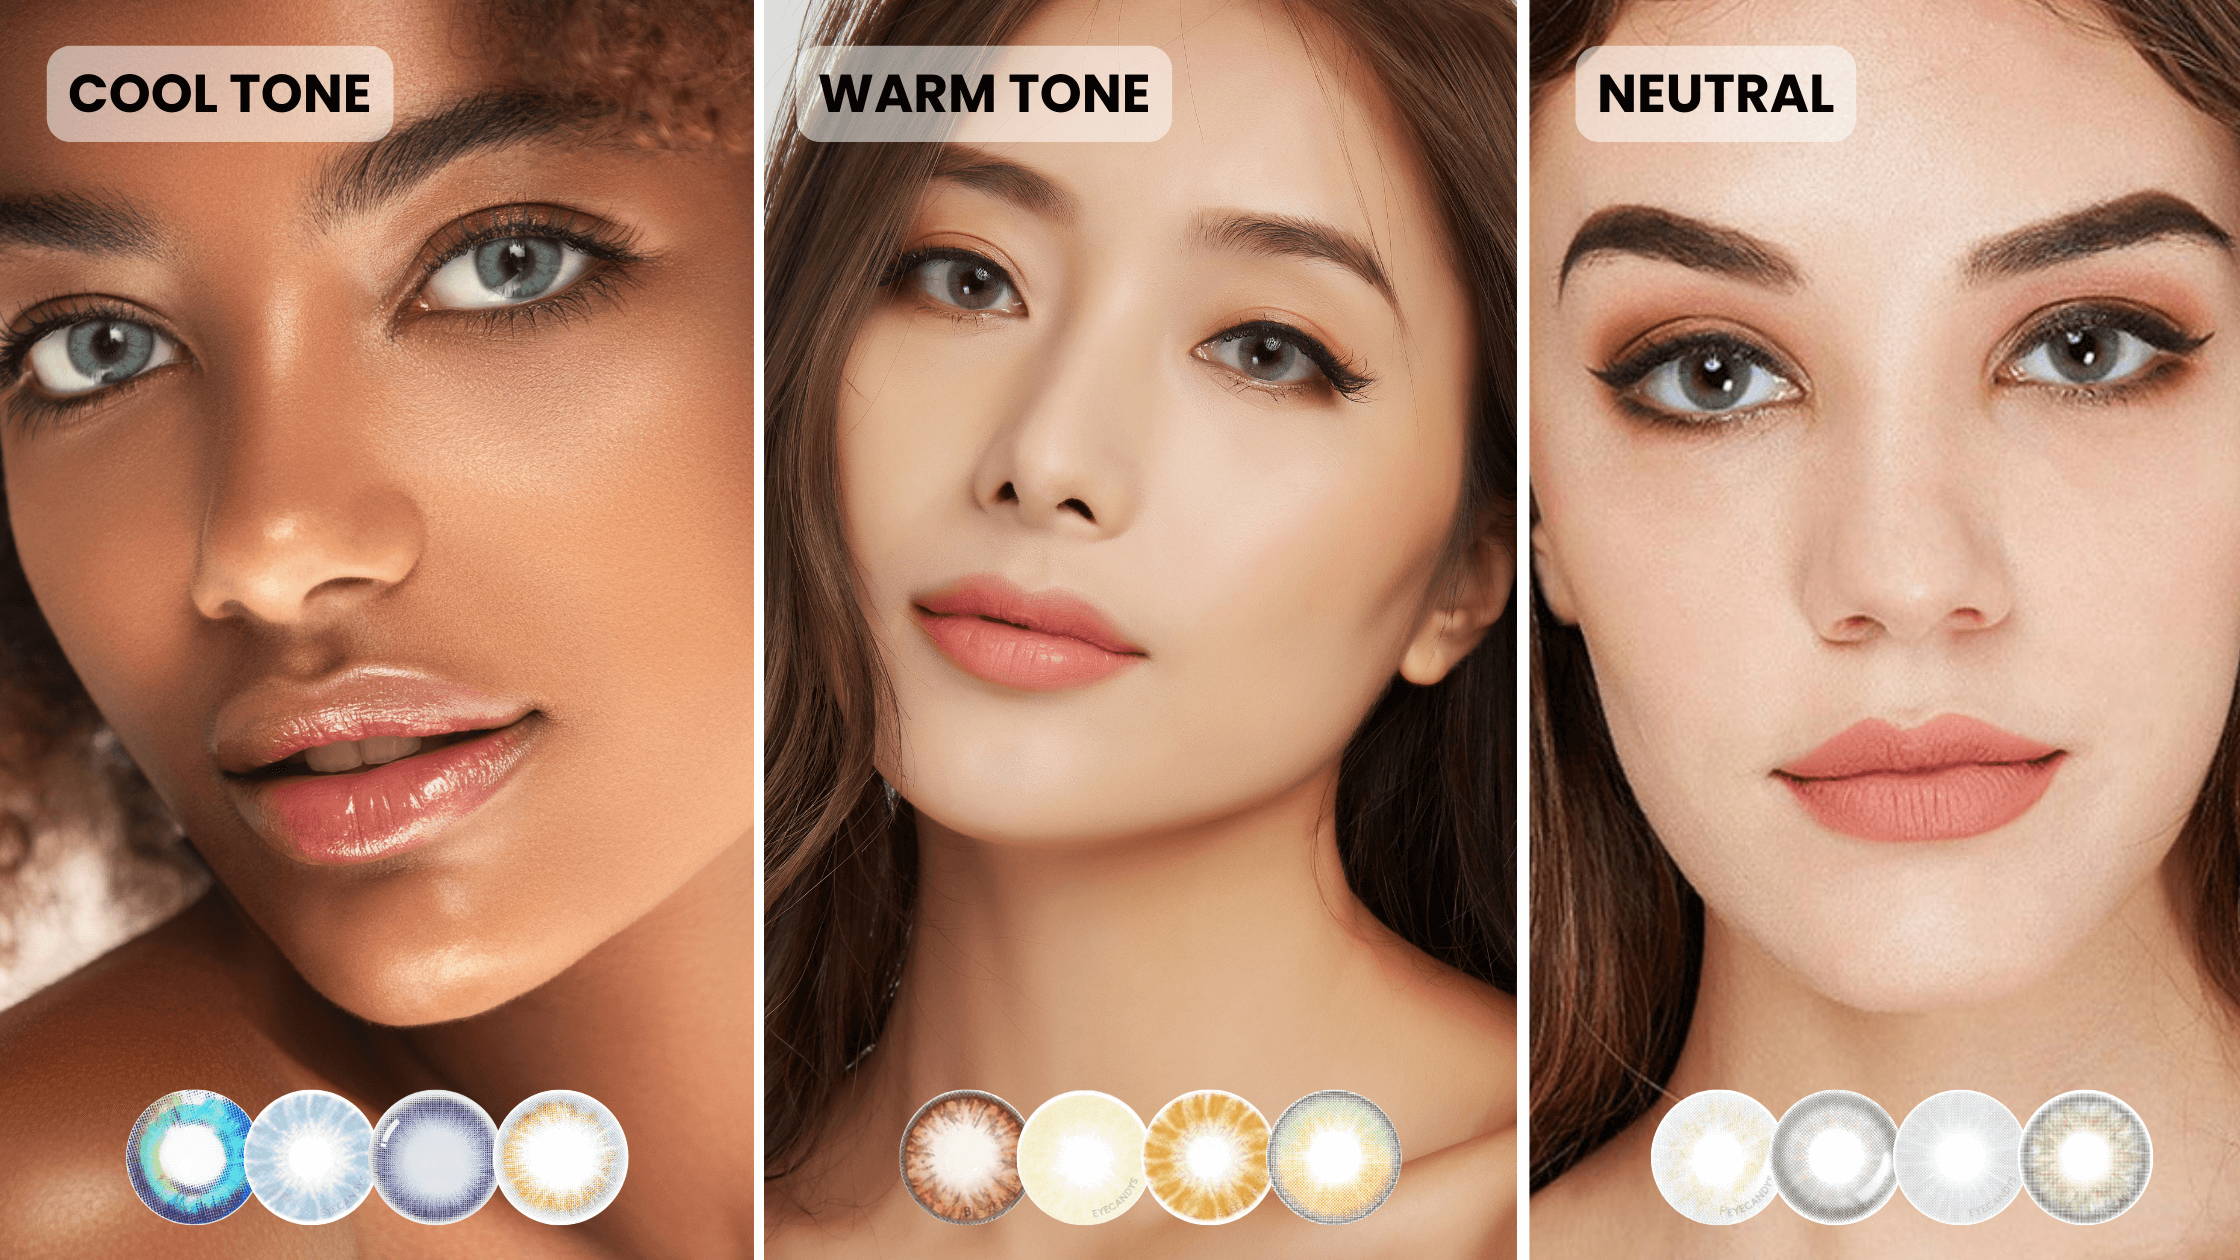 Color Tone of Contacts - Cool Tone, Warm Tone, Neutral